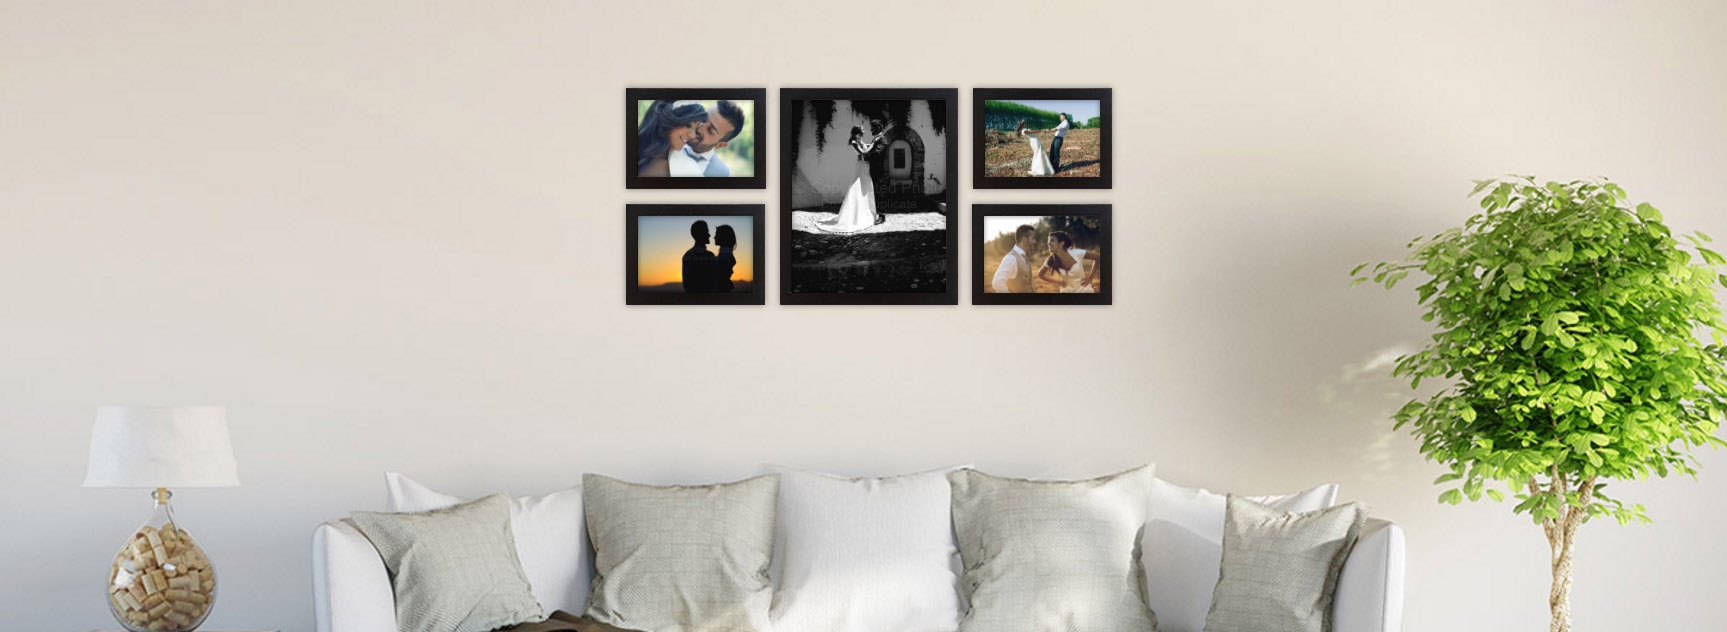 Wall Of Pictures : 30 Family Photo Wall Ideas To Bring Your Photos To